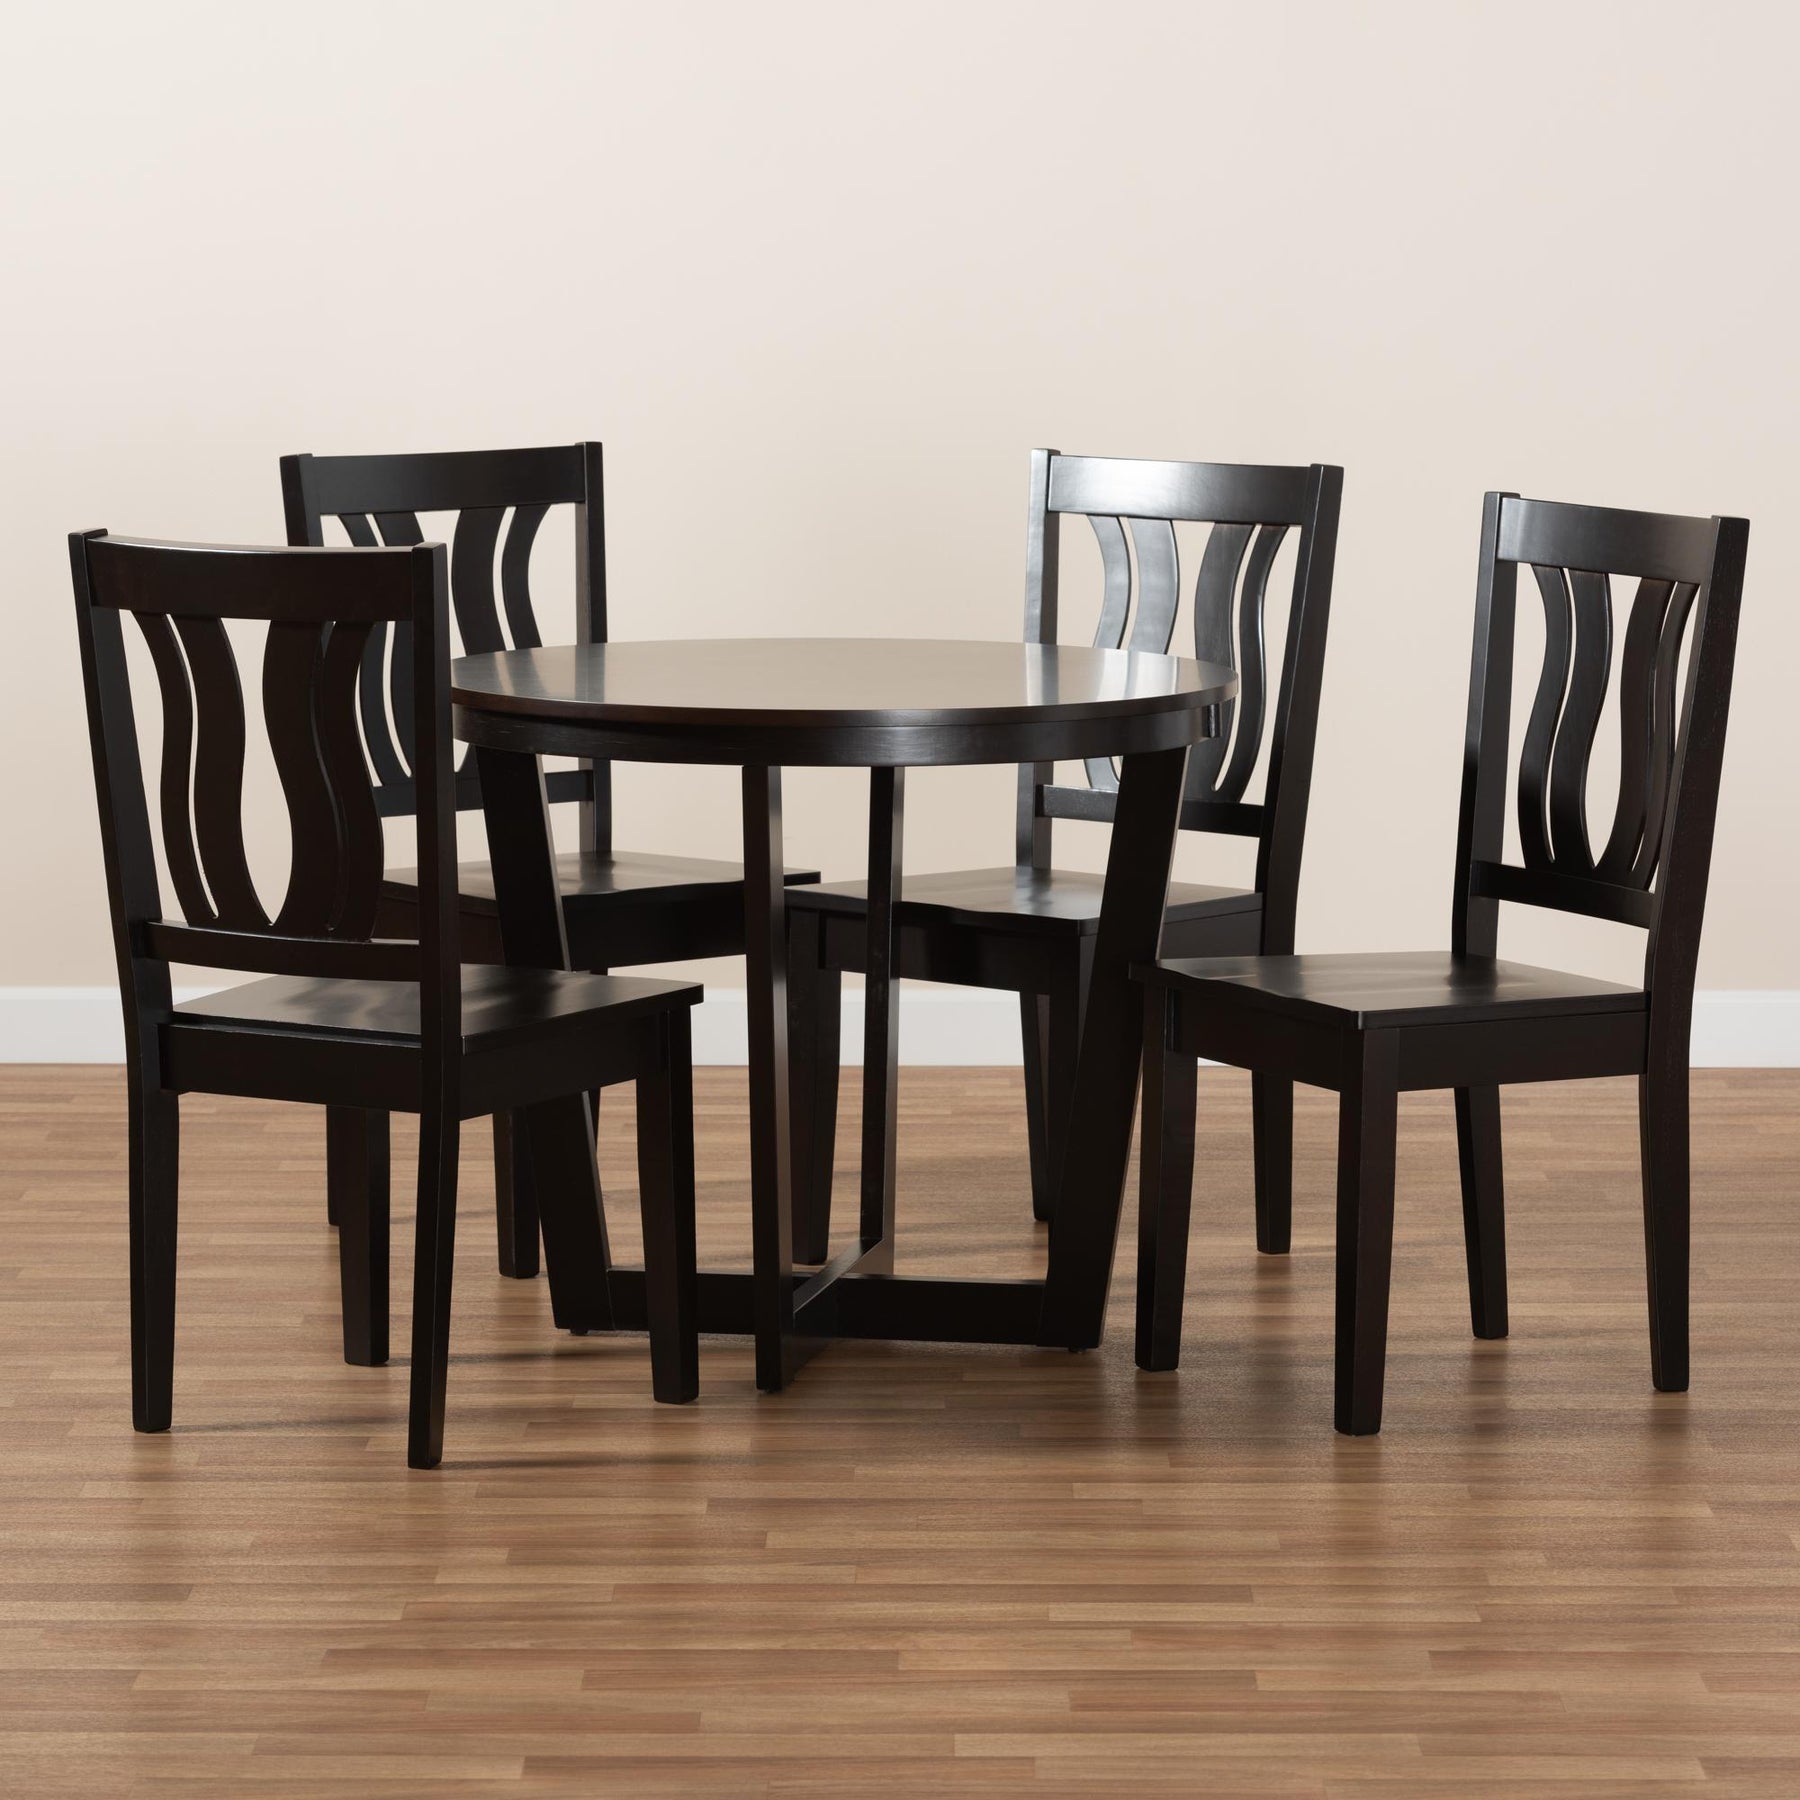 Baxton Studio Elodia Modern And Contemporary Transitional Dark Brown Finished Wood 5-Piece Dining Set - Elodia-Dark Brown-5PC Dining Set